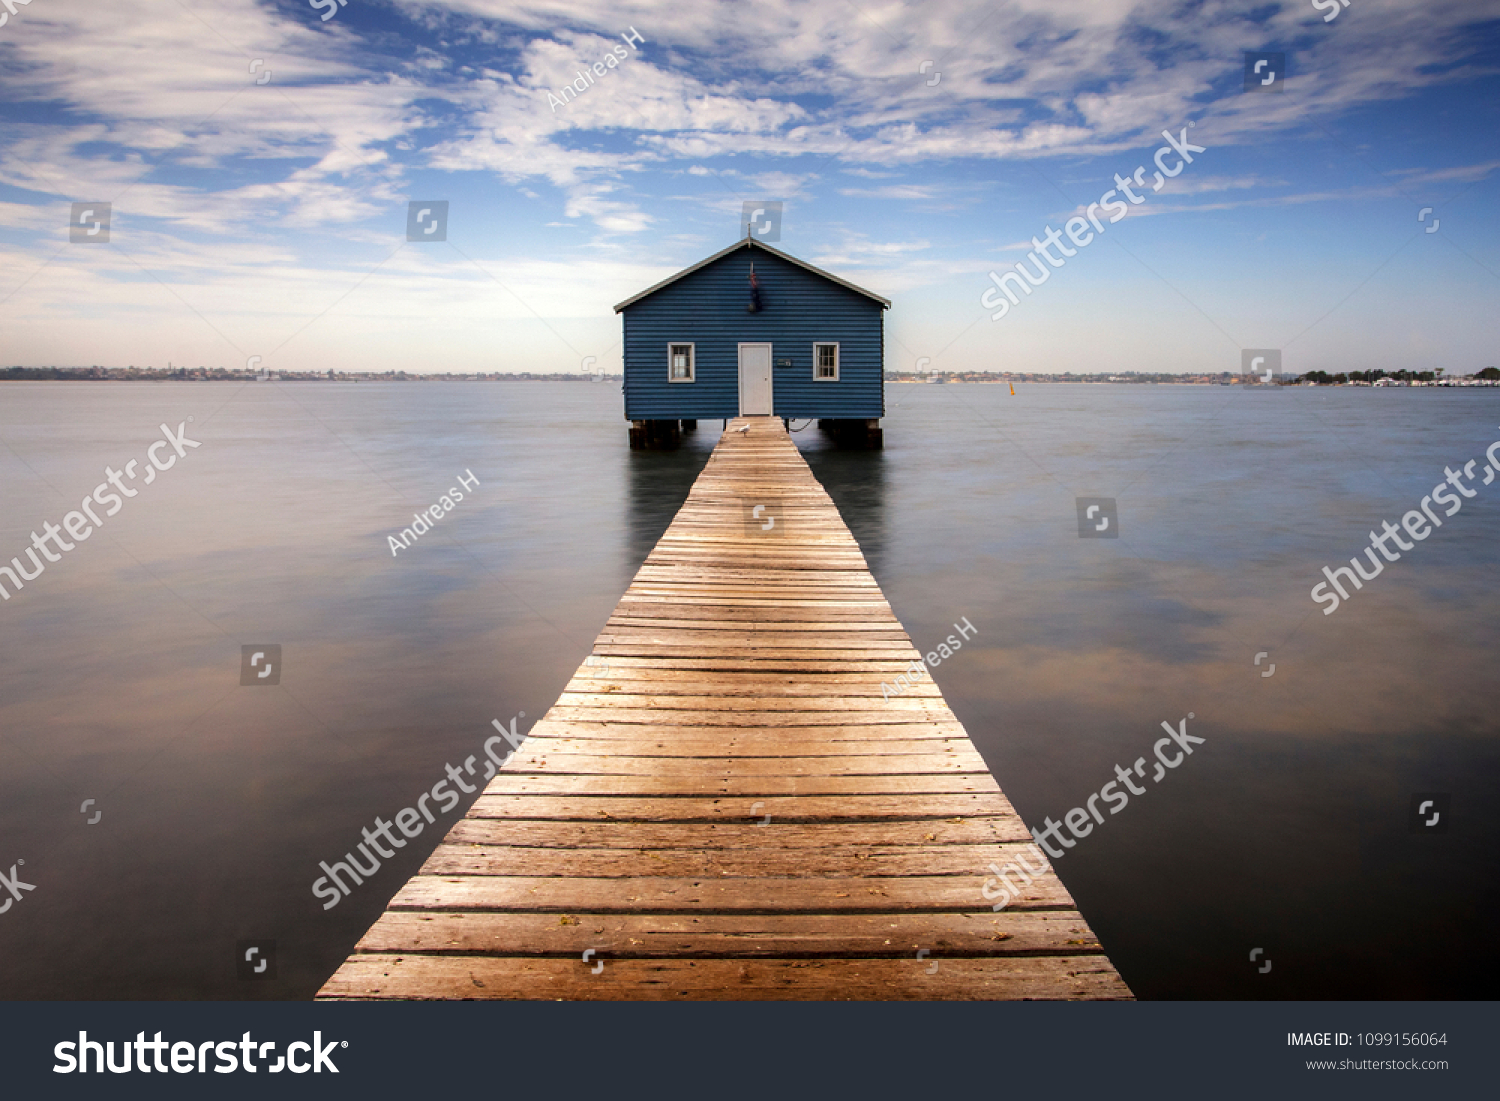 Blue Boat House Swan Lake Perth Stock Photo Edit Now 1099156064